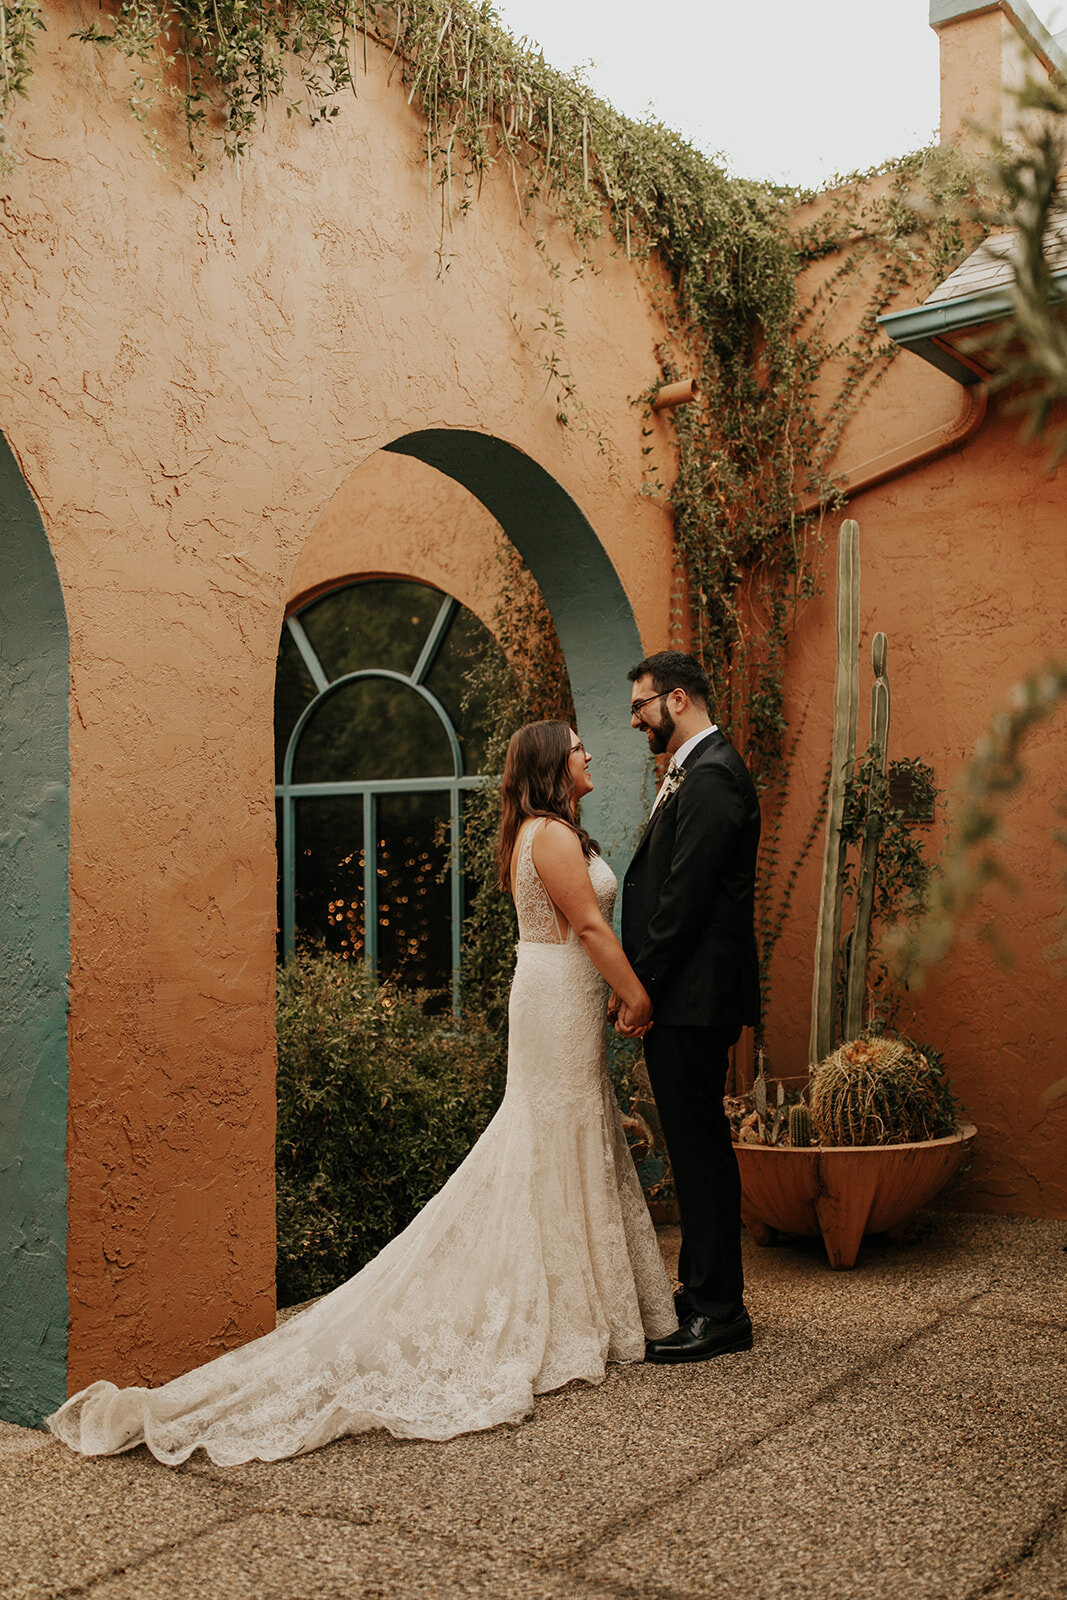 A+R_Tucson_Wedding_ToriOsteraaPhotography297_websize